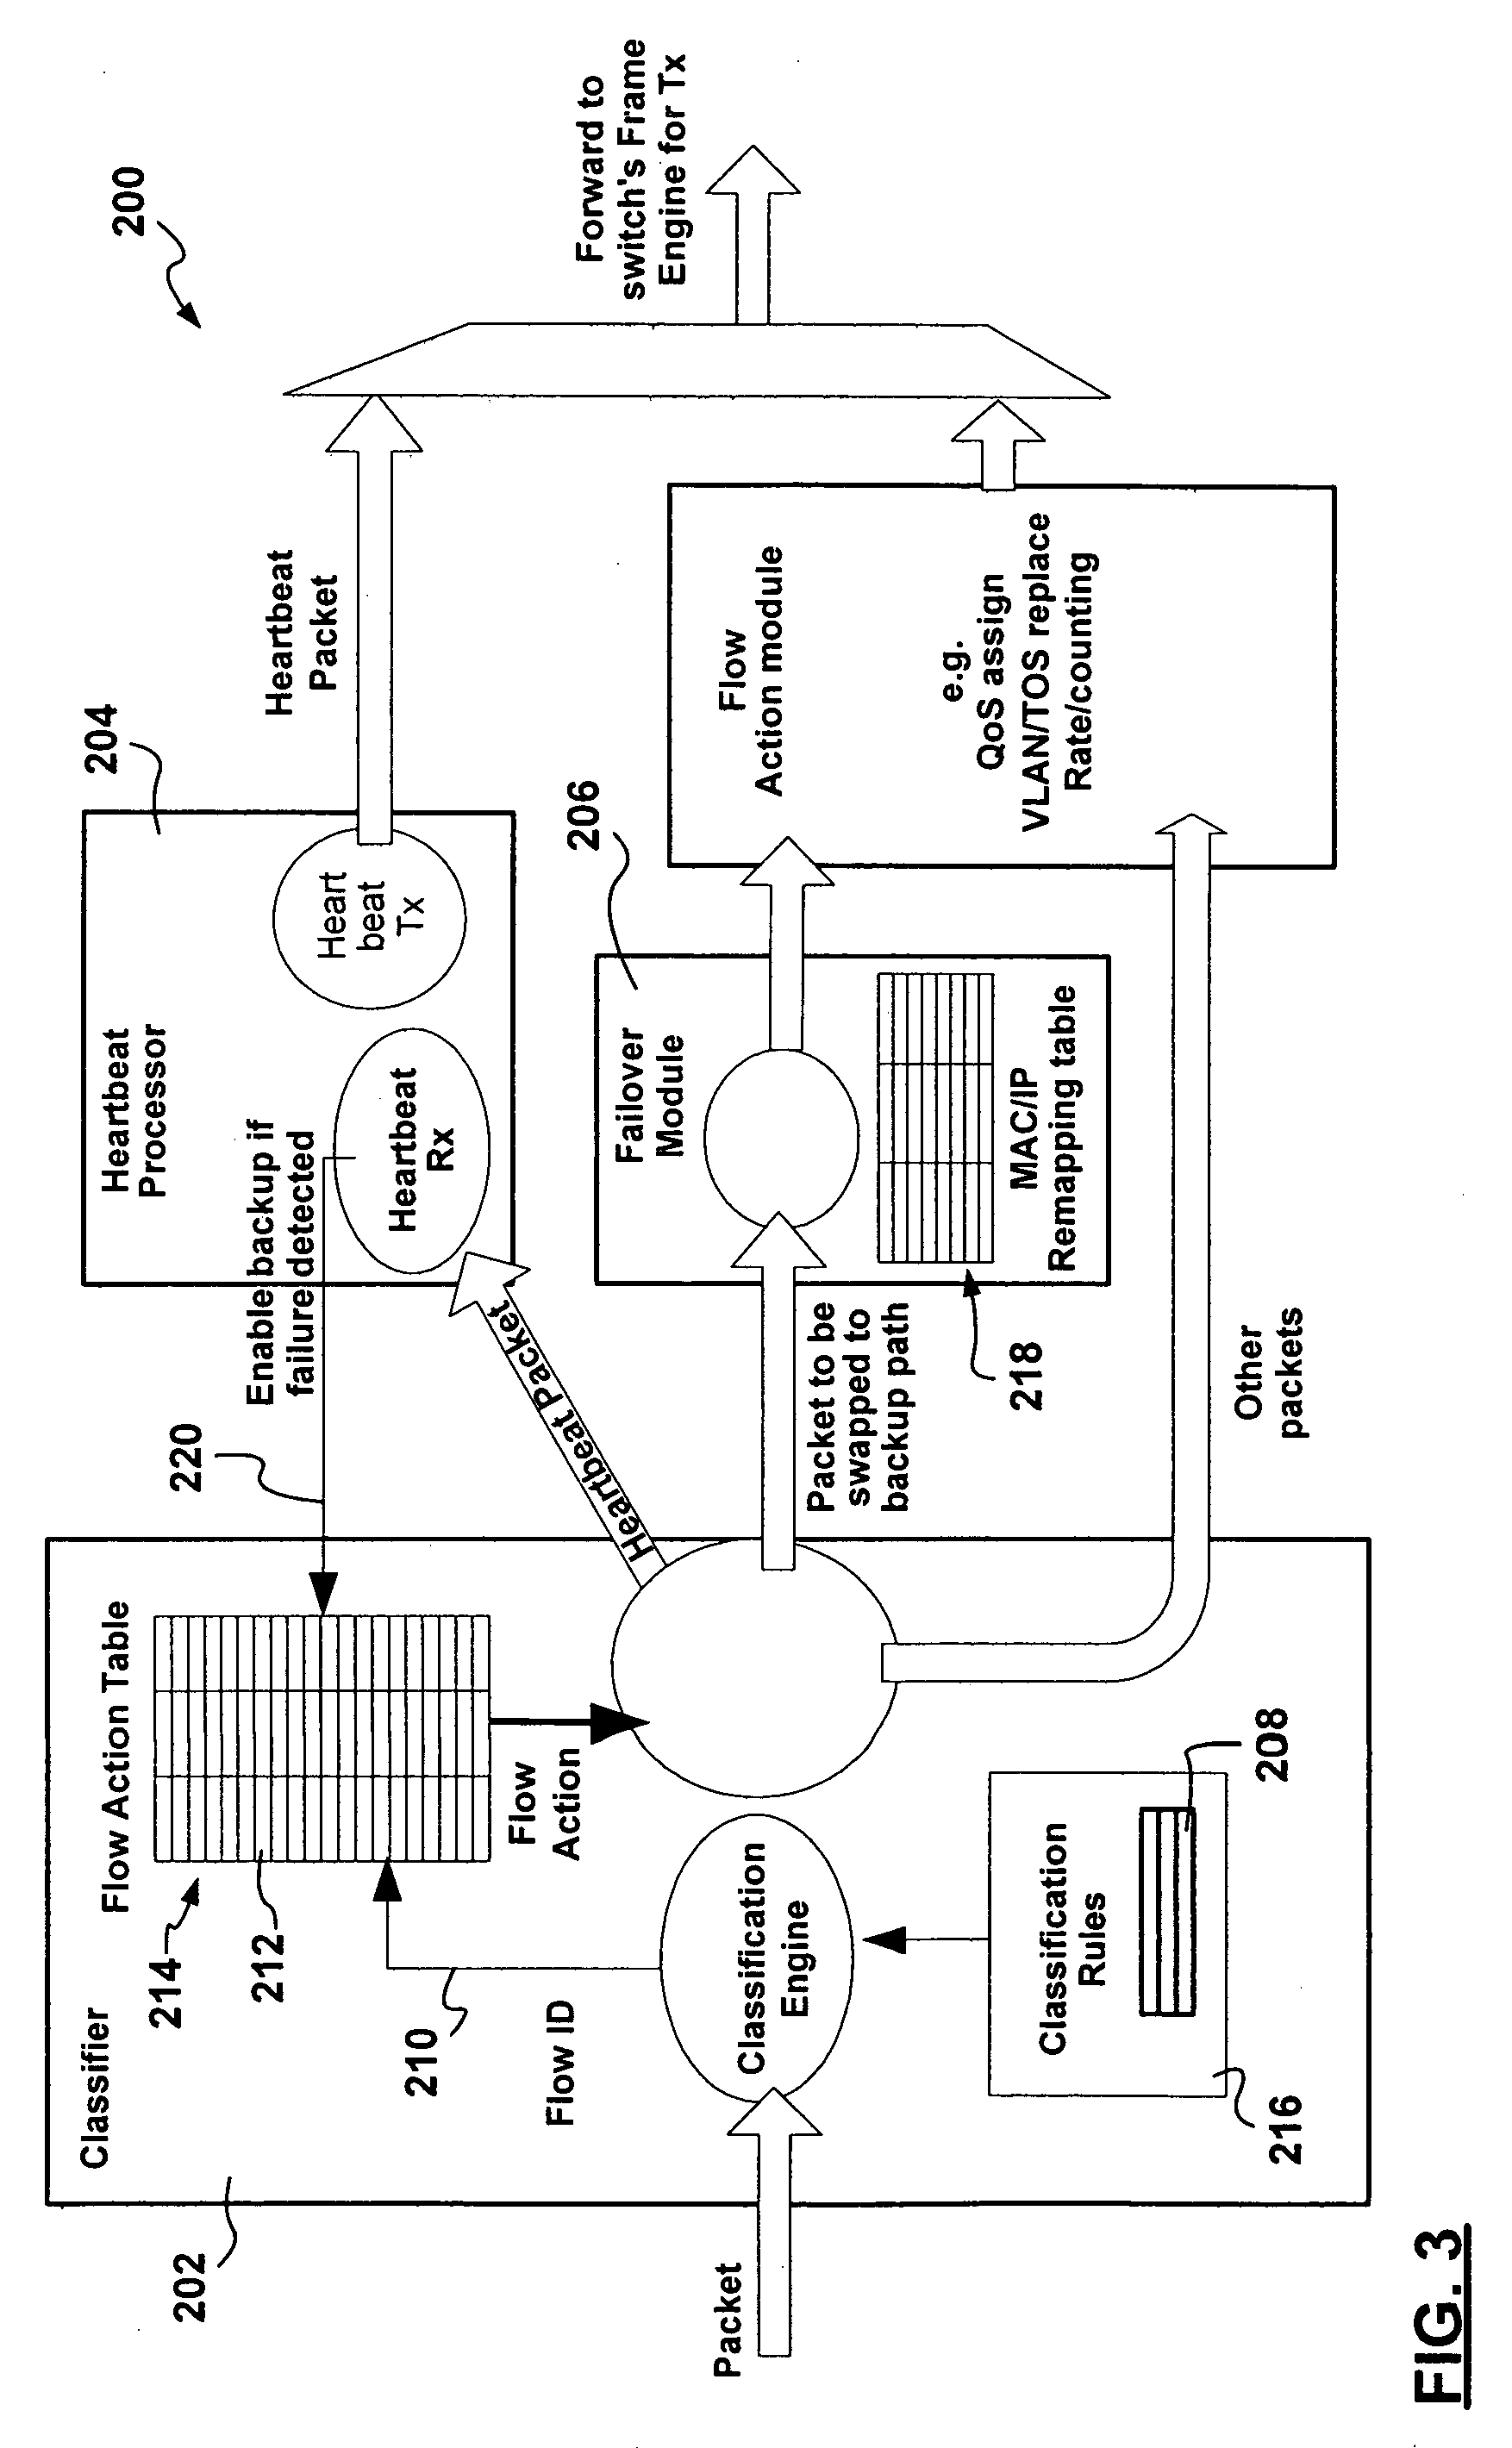 Method and apparatus providing rapid end-to-end failover in a packet switched communications network